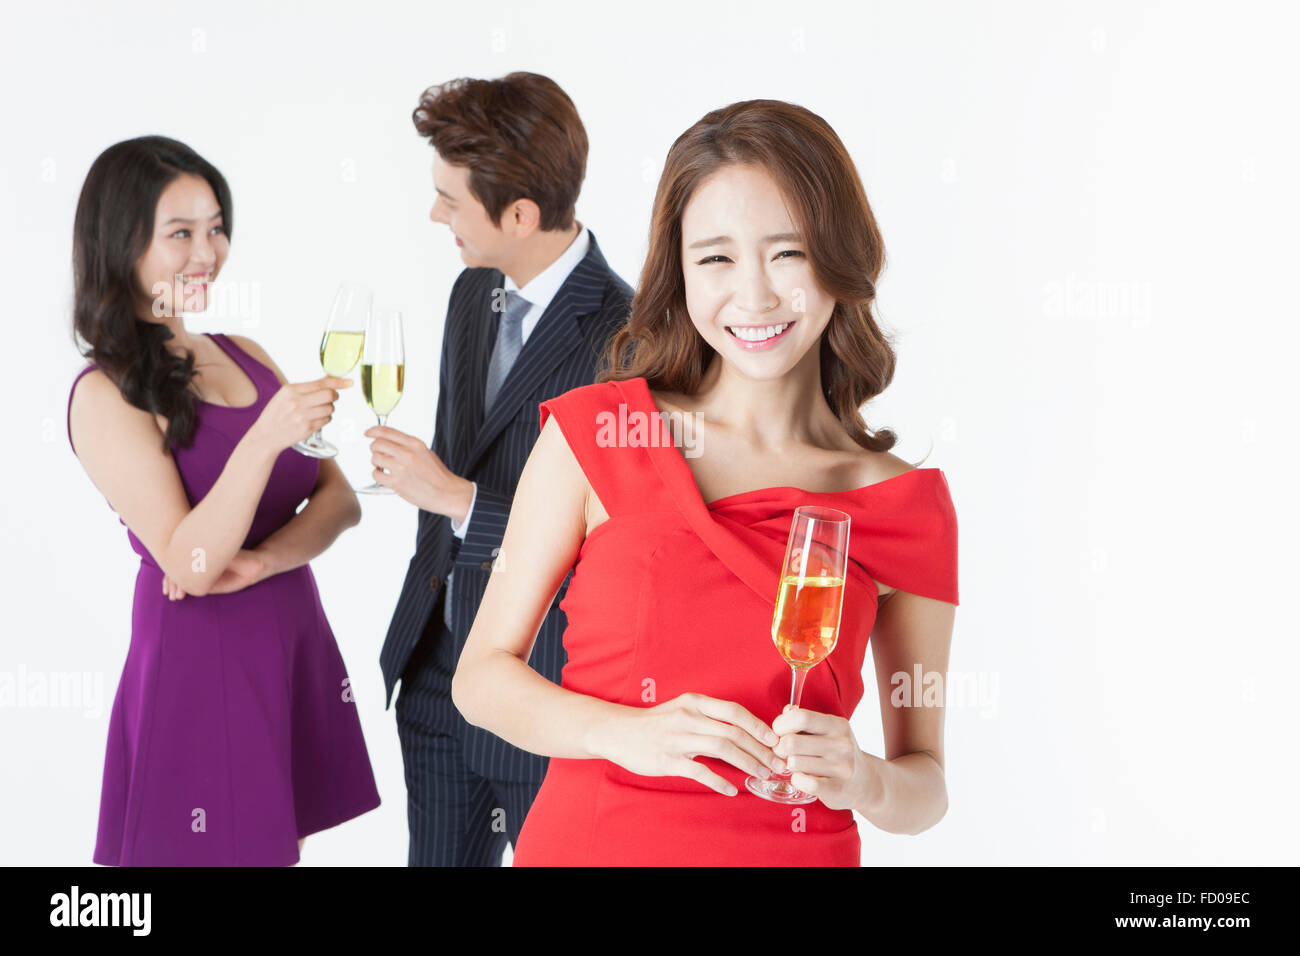 Young adults having a champagne party Stock Photo